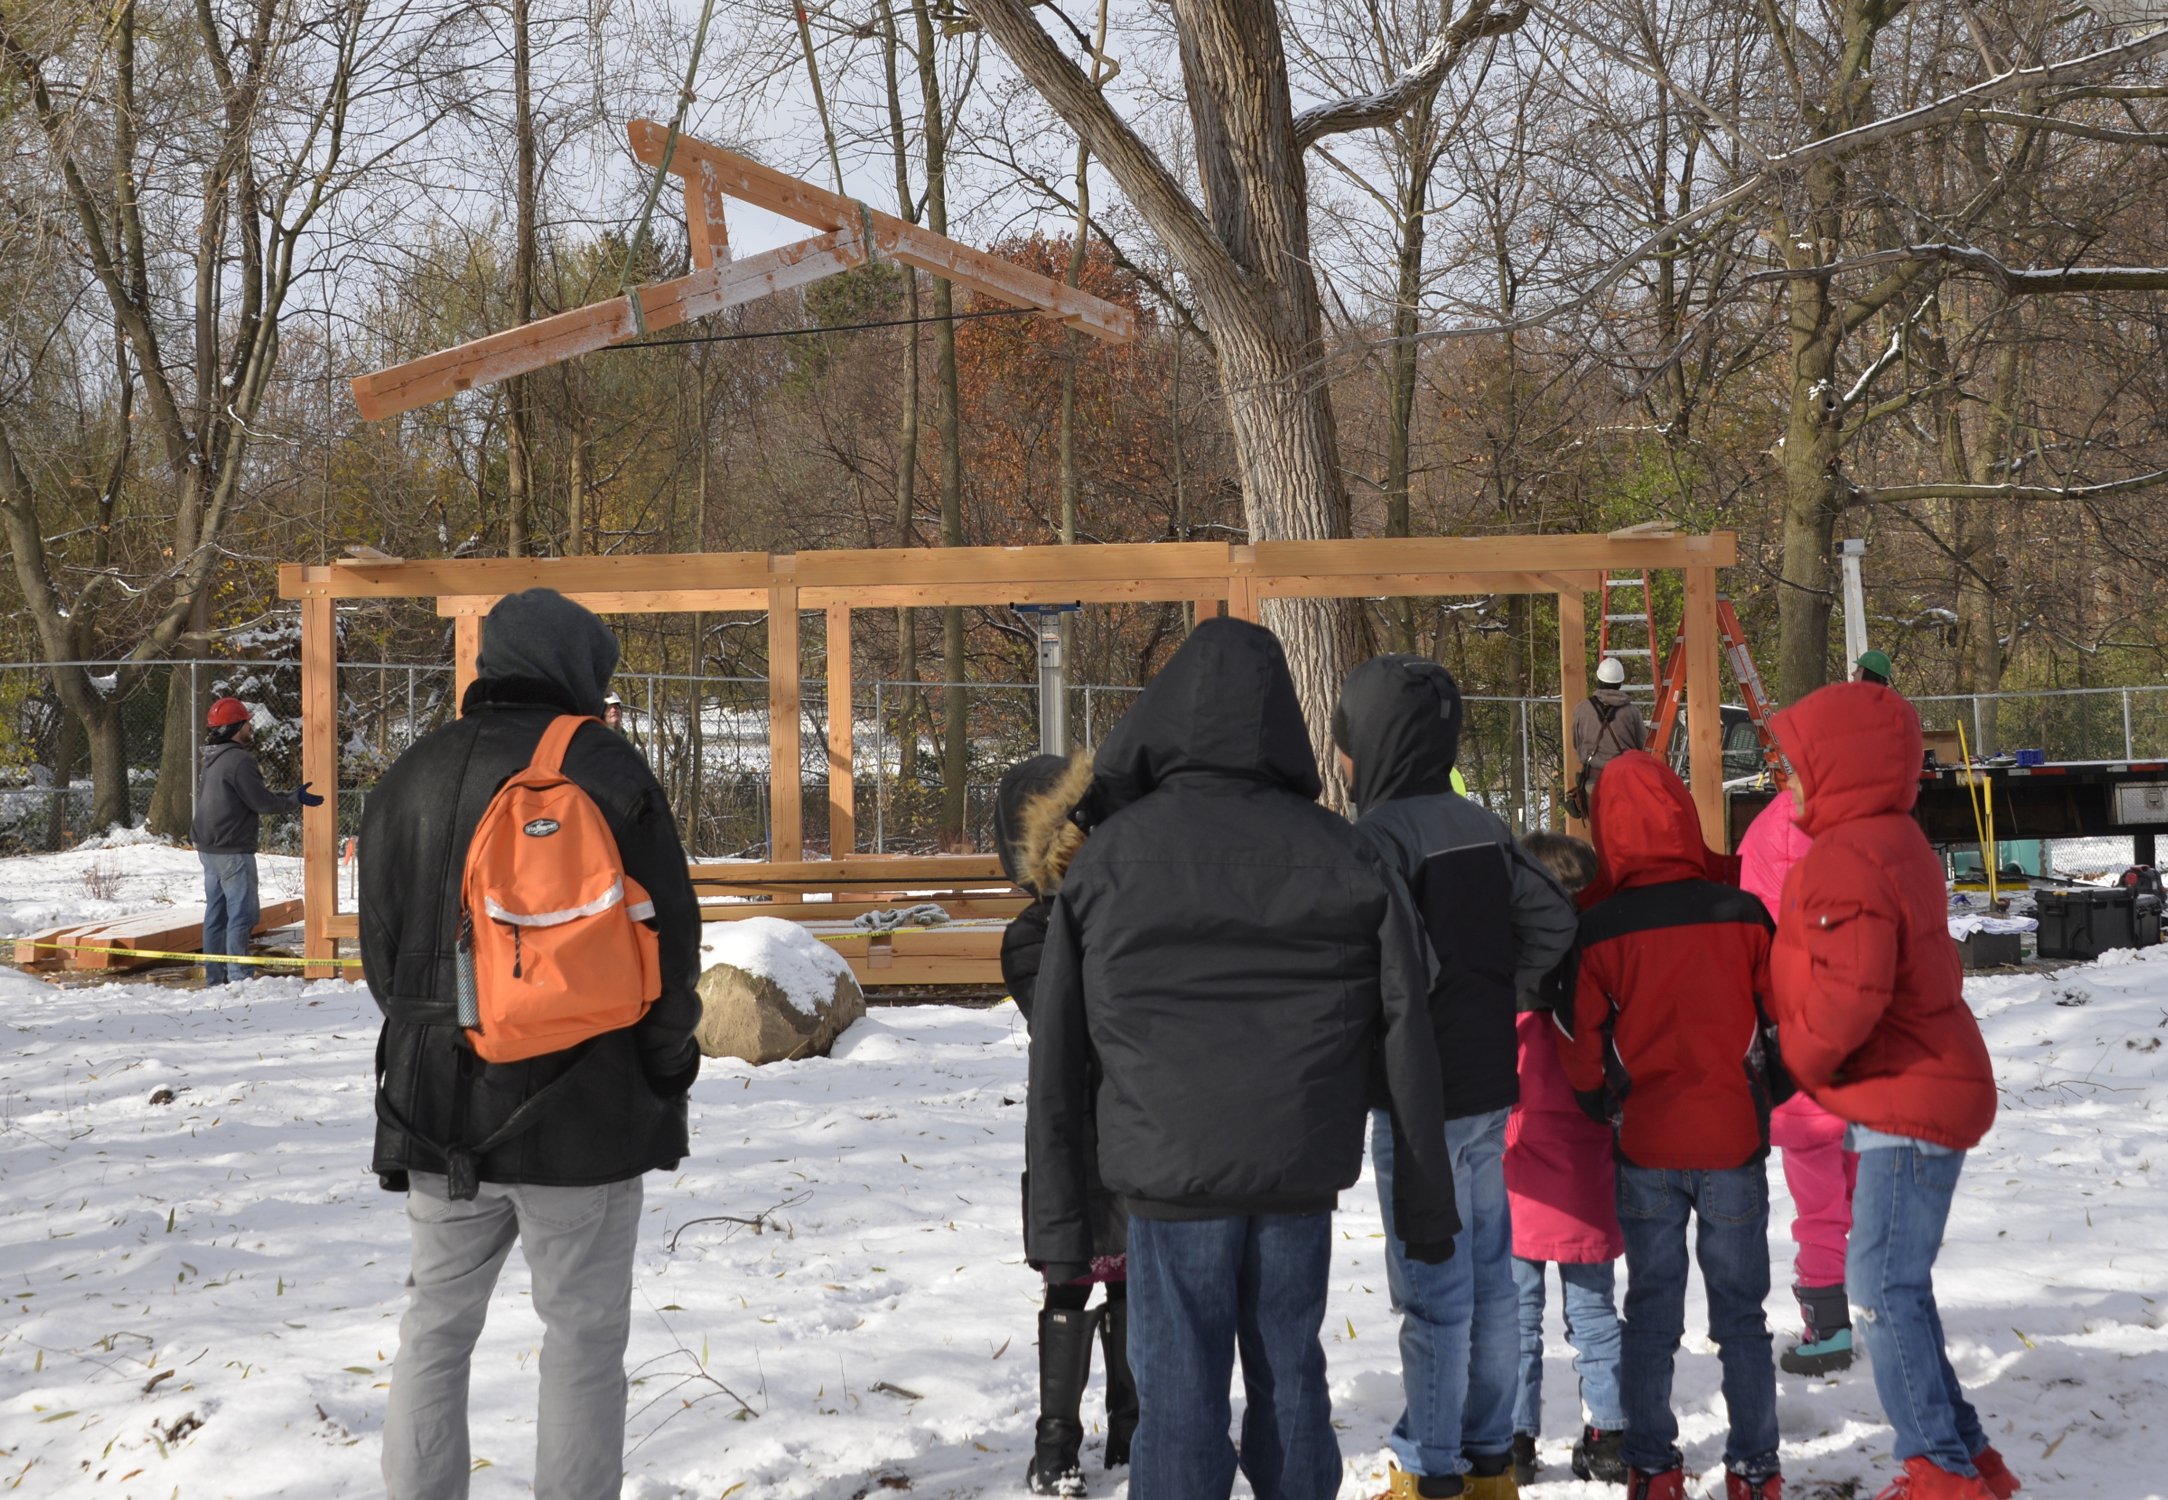 Children, teachers, and administration of Rochester Childfirst Network celebrated the raising of their timber frame outdoor pavilion/classroom by New Energy Works Timberframers.